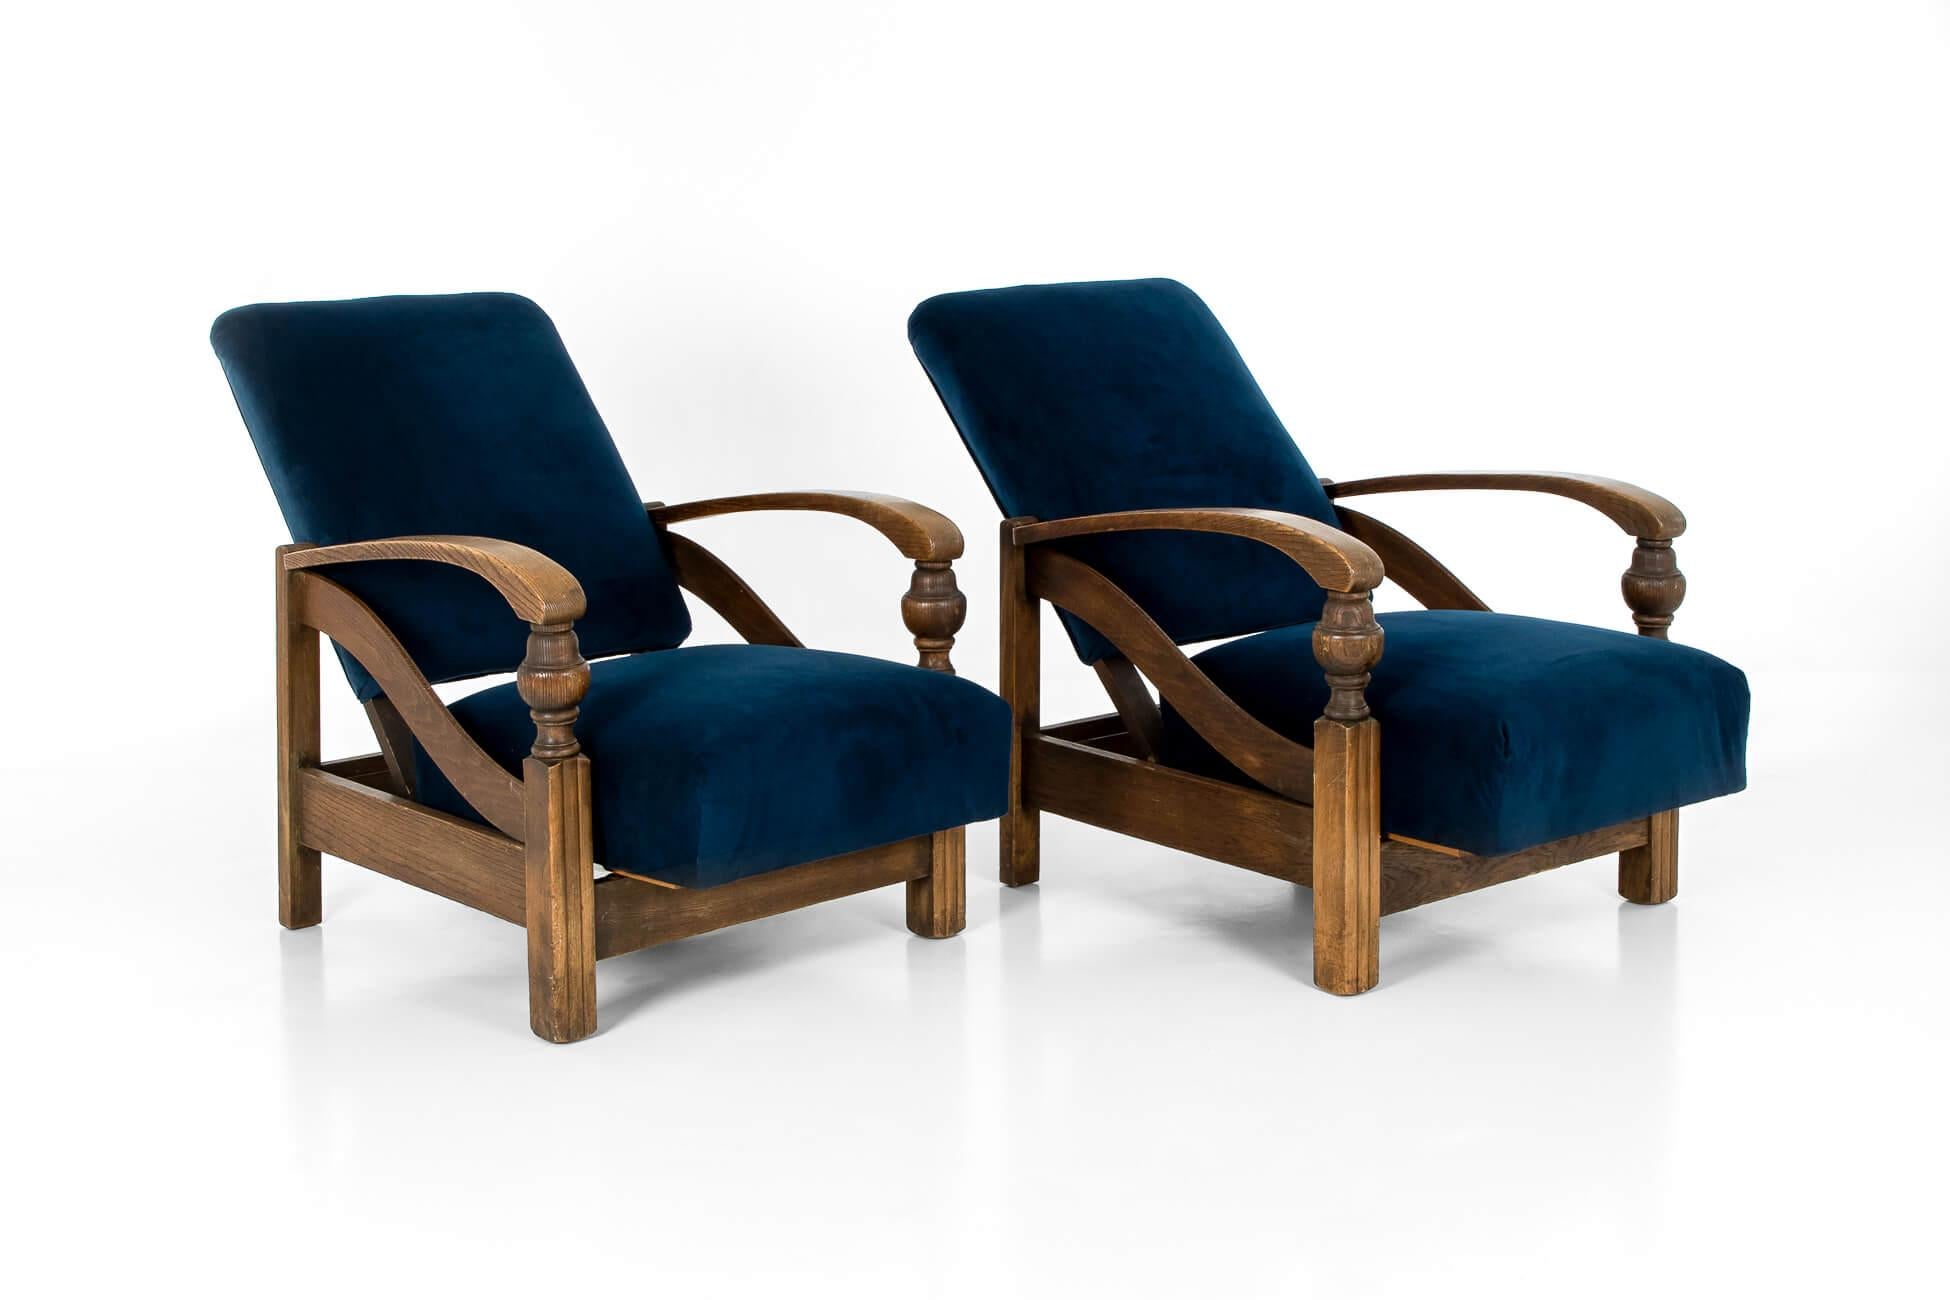 Carved Pair of Art Deco Lounge Chairs For Sale